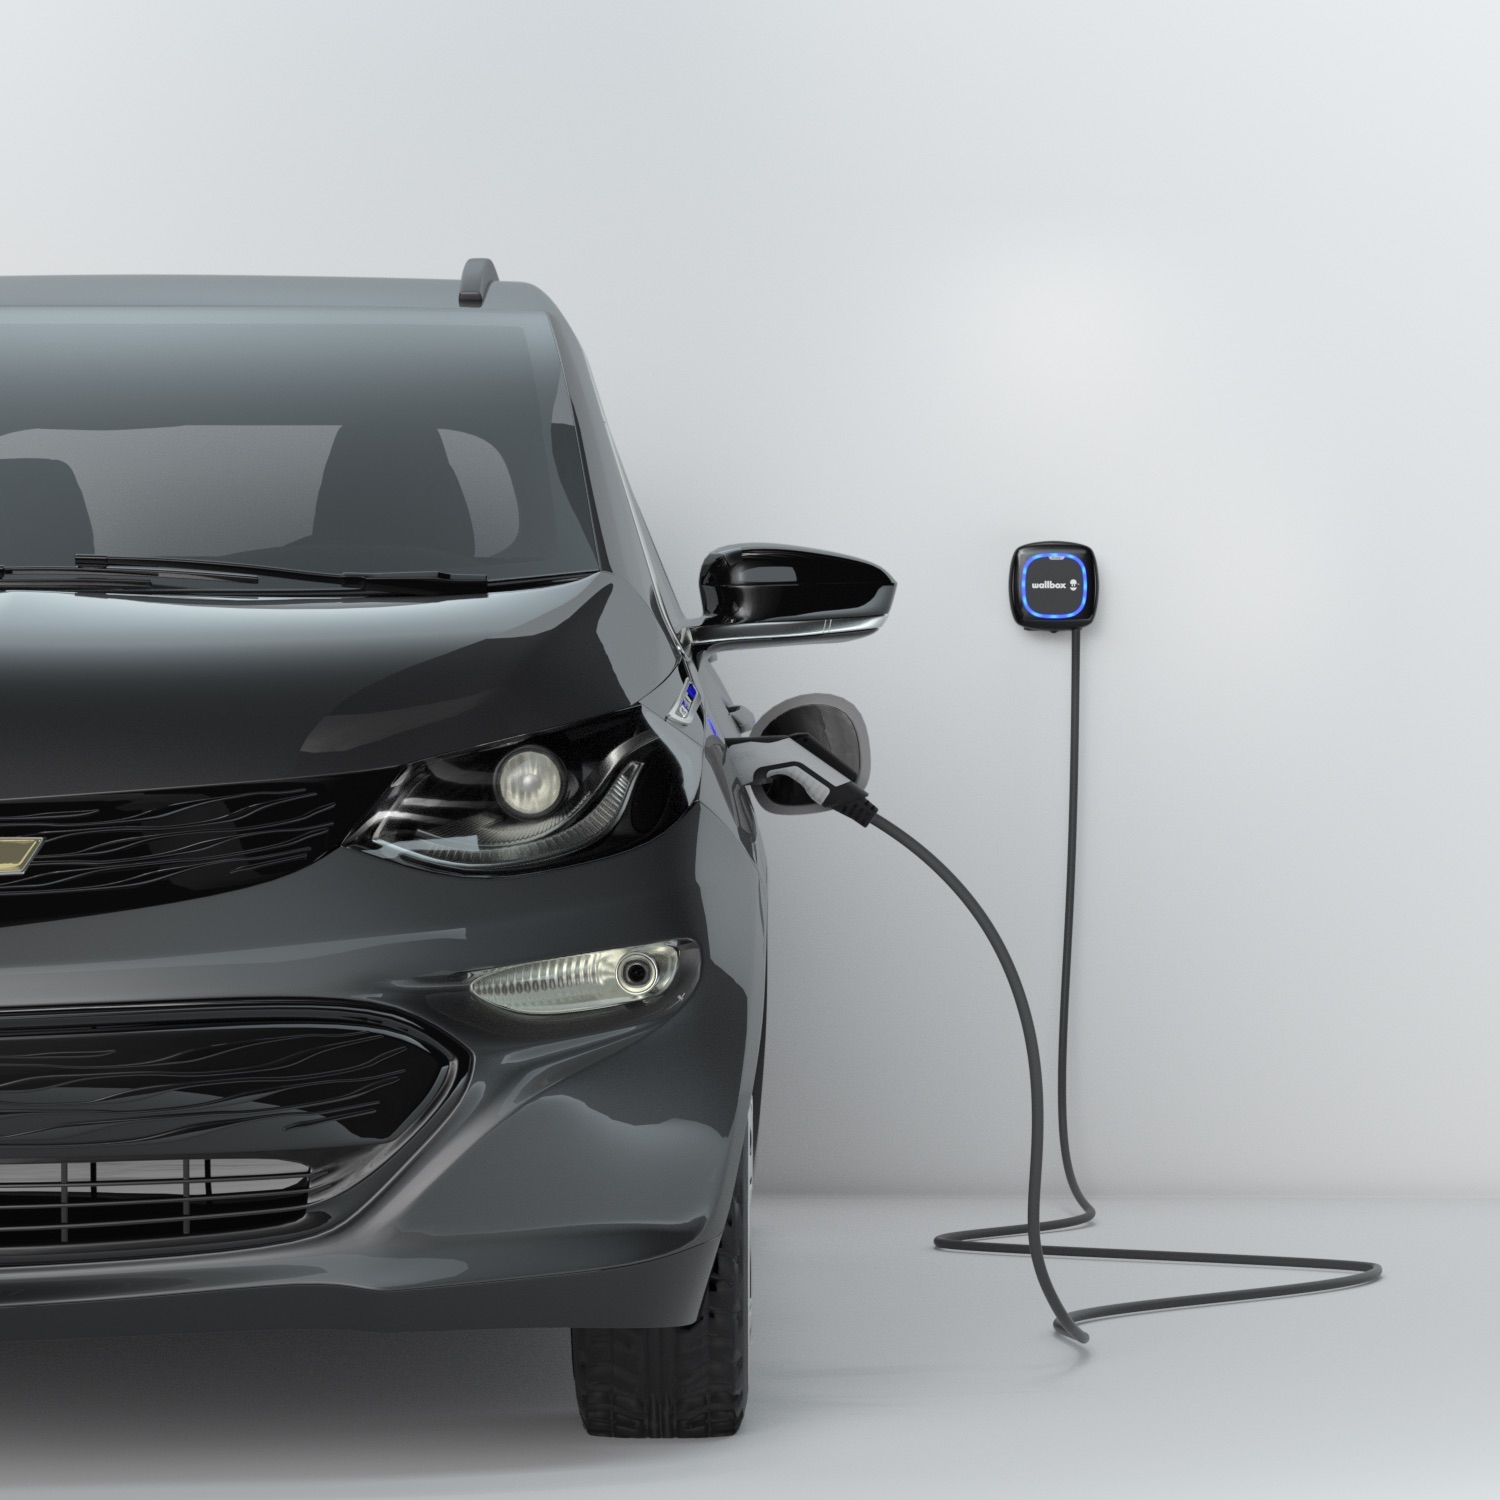 EV Charging Service Provider YourStand Signs Distribution Agreement  with Global EV Charger Manufacturer Wallbox